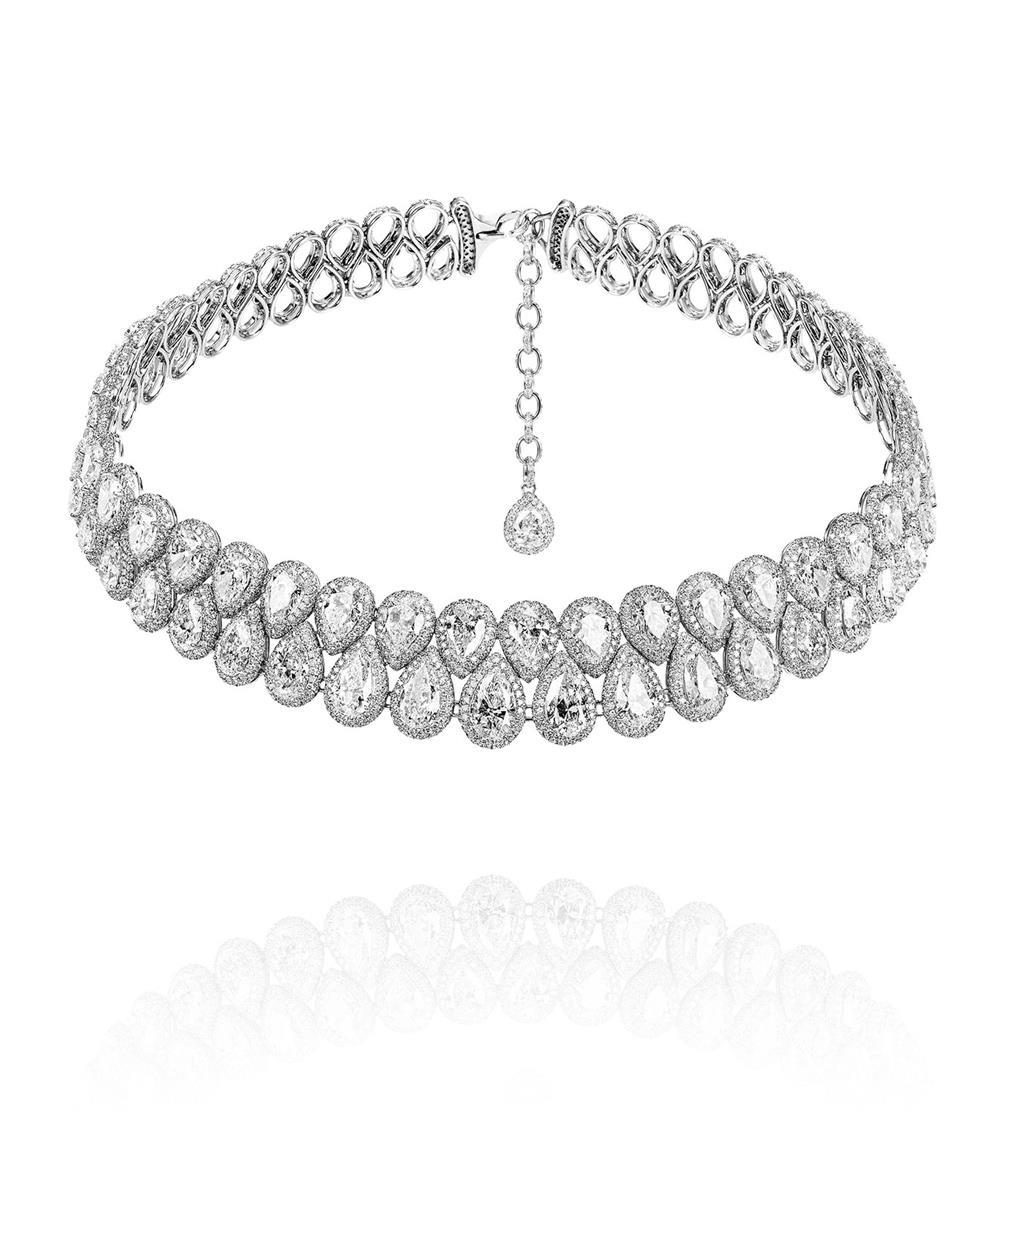 Necklace "L'Hiver"- White gold set with 58 pear-shaped diamonds and 4057 diamonds